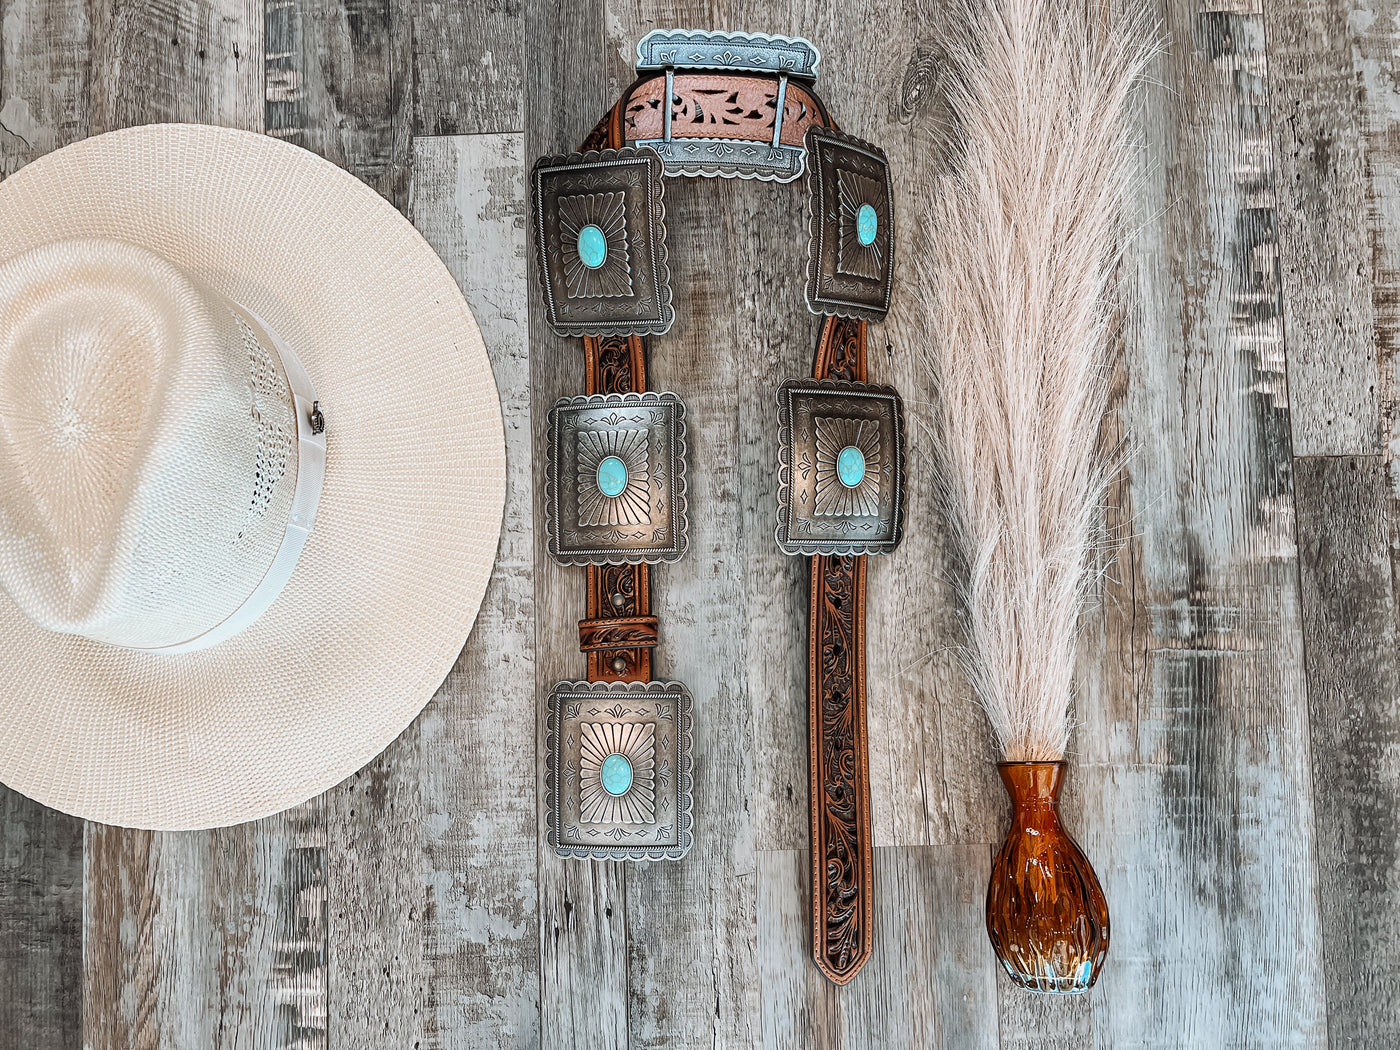 The Bailey Turquoise Concho Belt